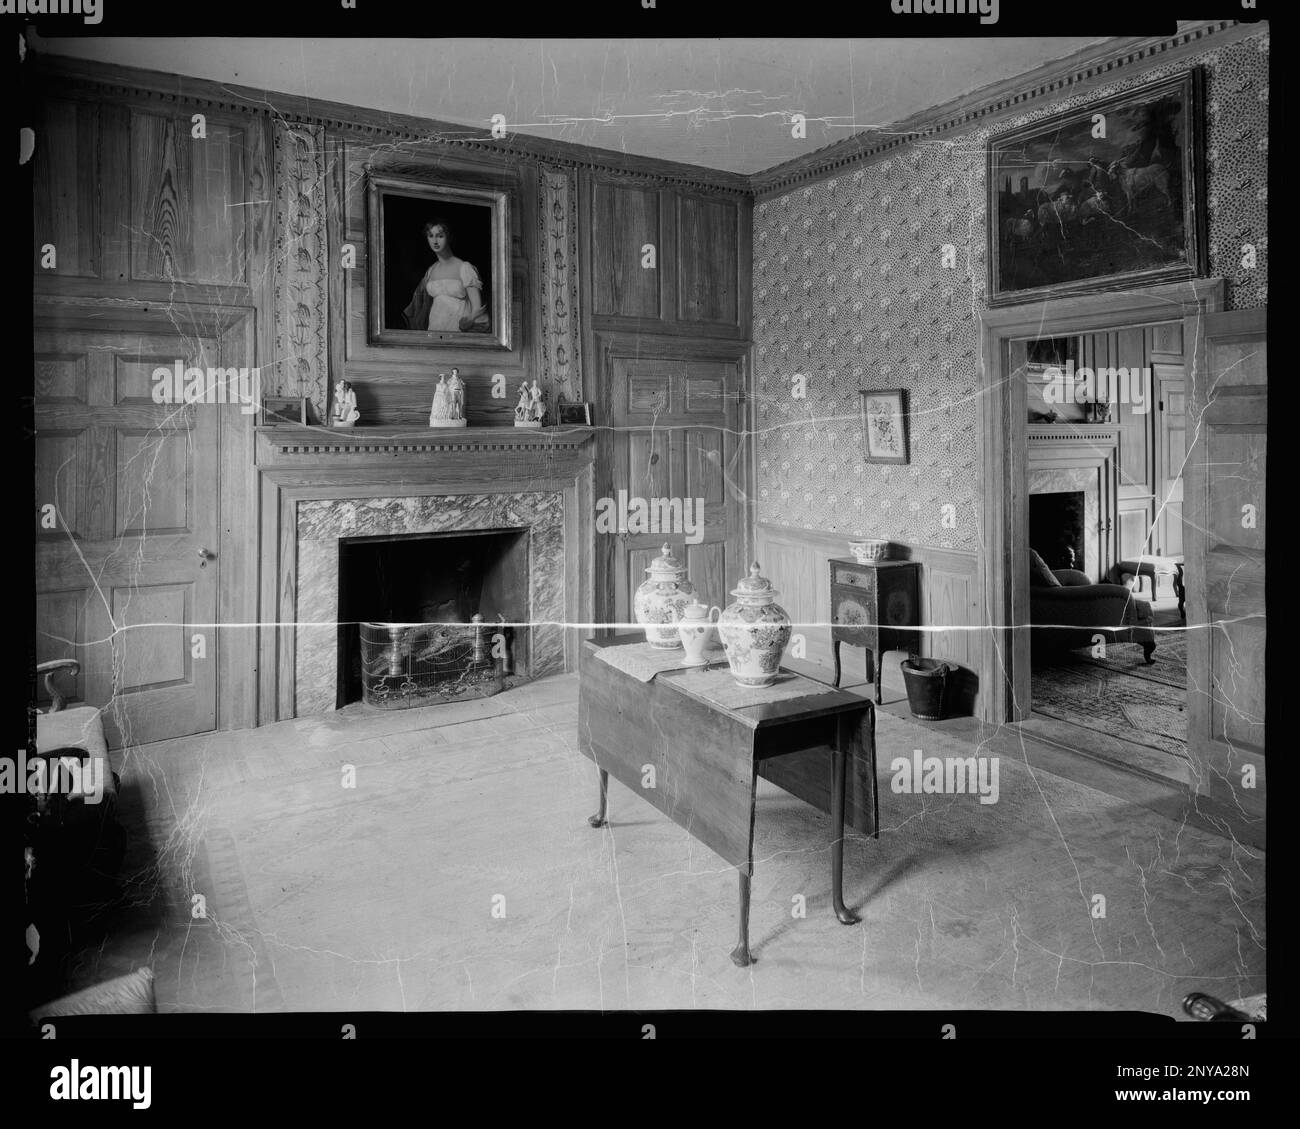 Elkington, Eastville vic., Northampton County, Virginia. Carnegie Survey of the Architecture of the South. United States  Virginia  Northampton County  Eastville vic, Fireplaces, Moldings, Wallpapers, Interiors. Stock Photo